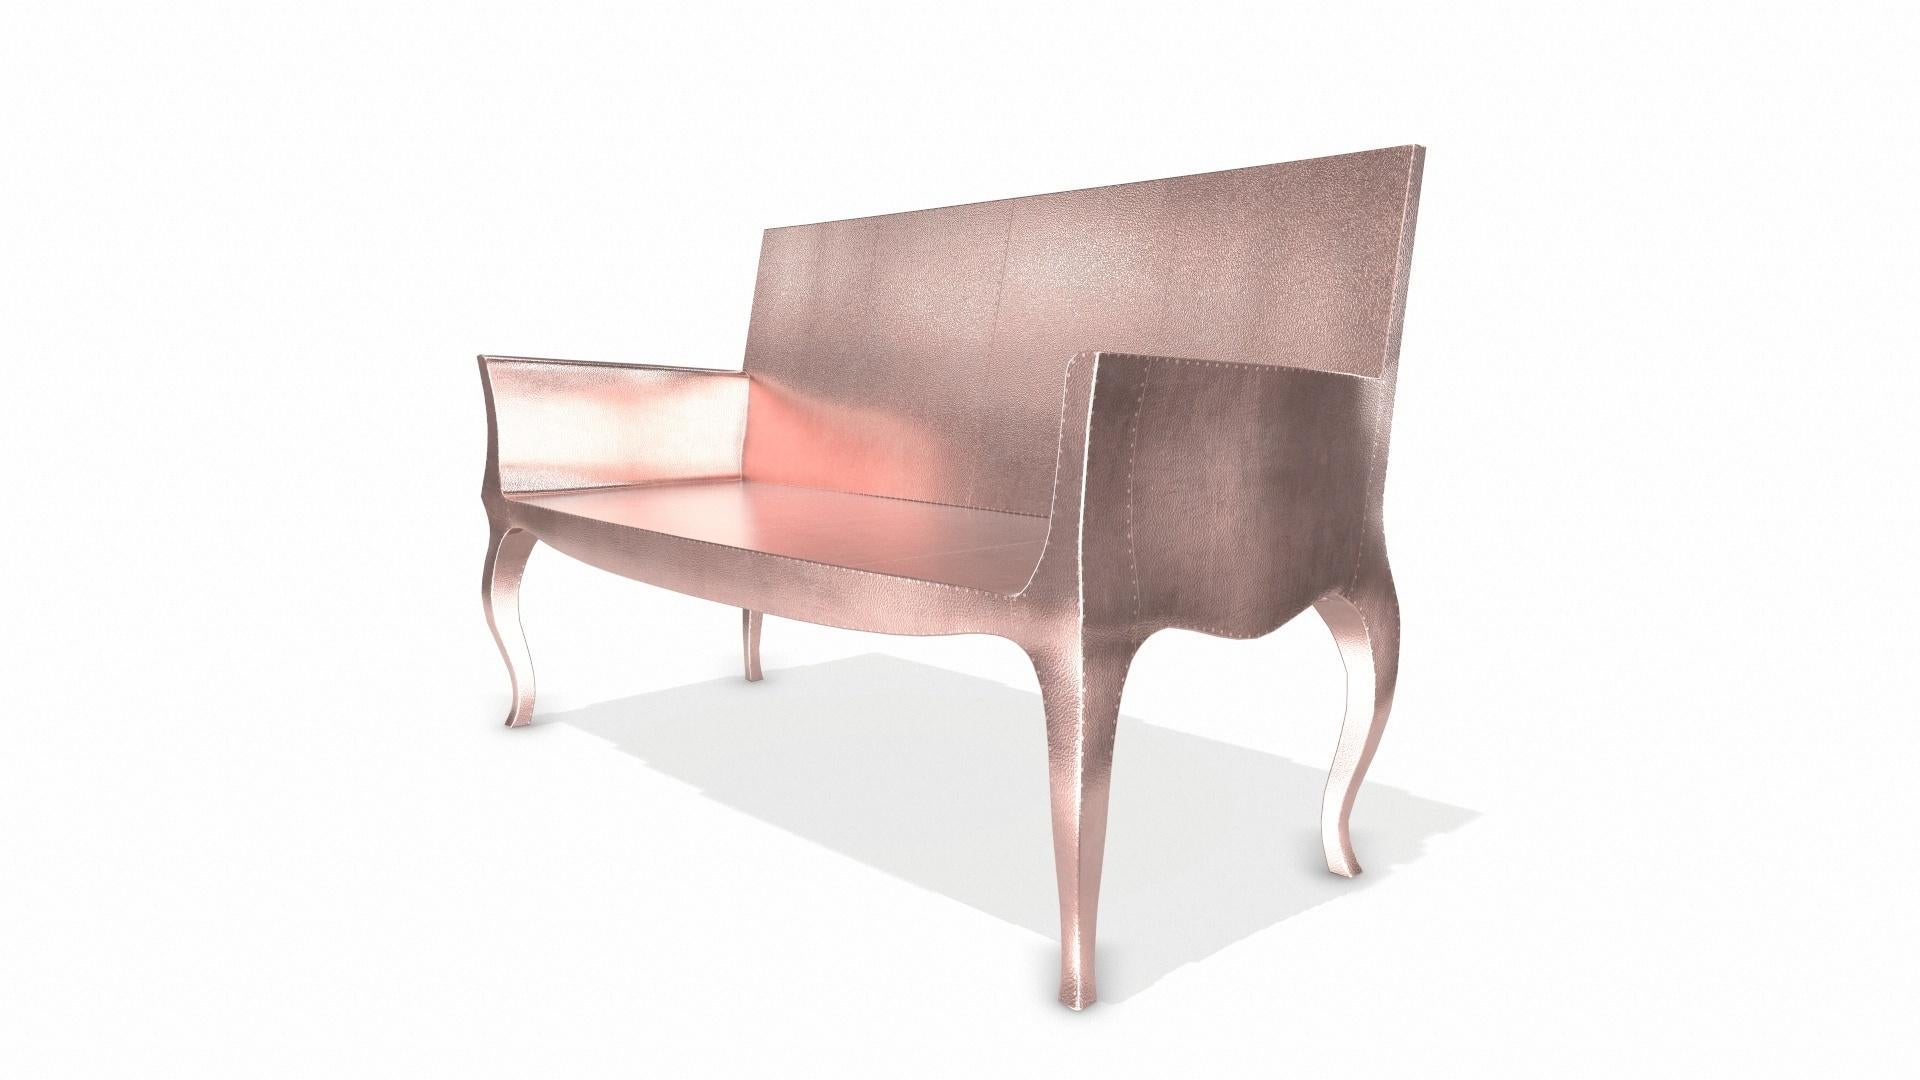 Woodwork Louise Settee Art Deco Daybeds in Fine Hammered Copper by Paul Mathieu For Sale